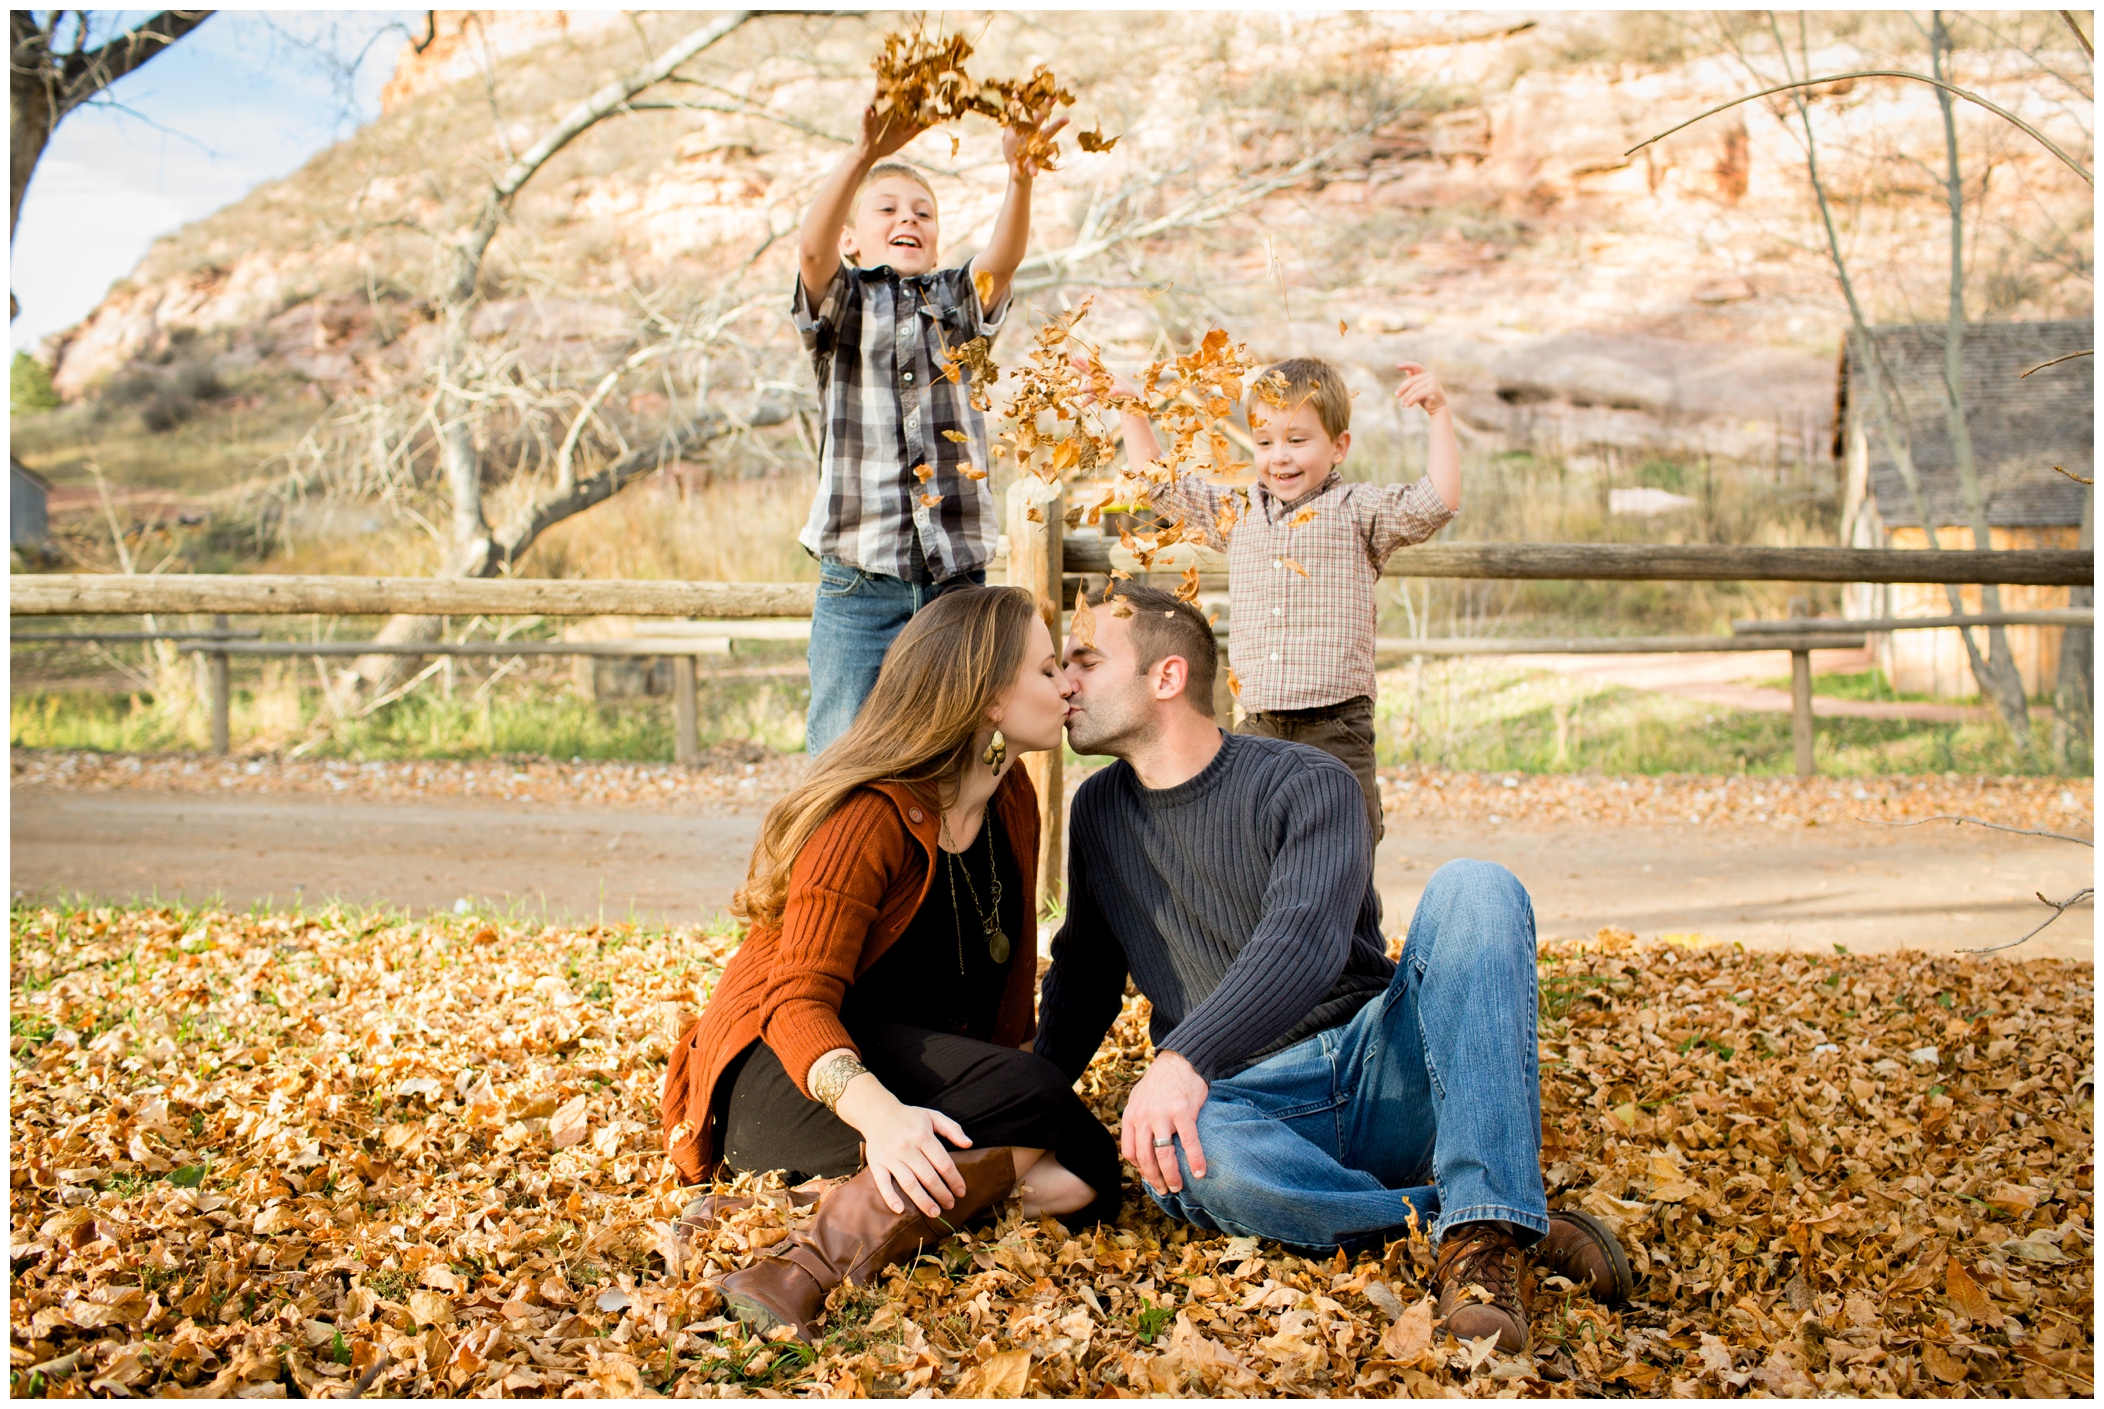 Colorado family photography by Plum Pretty Photography